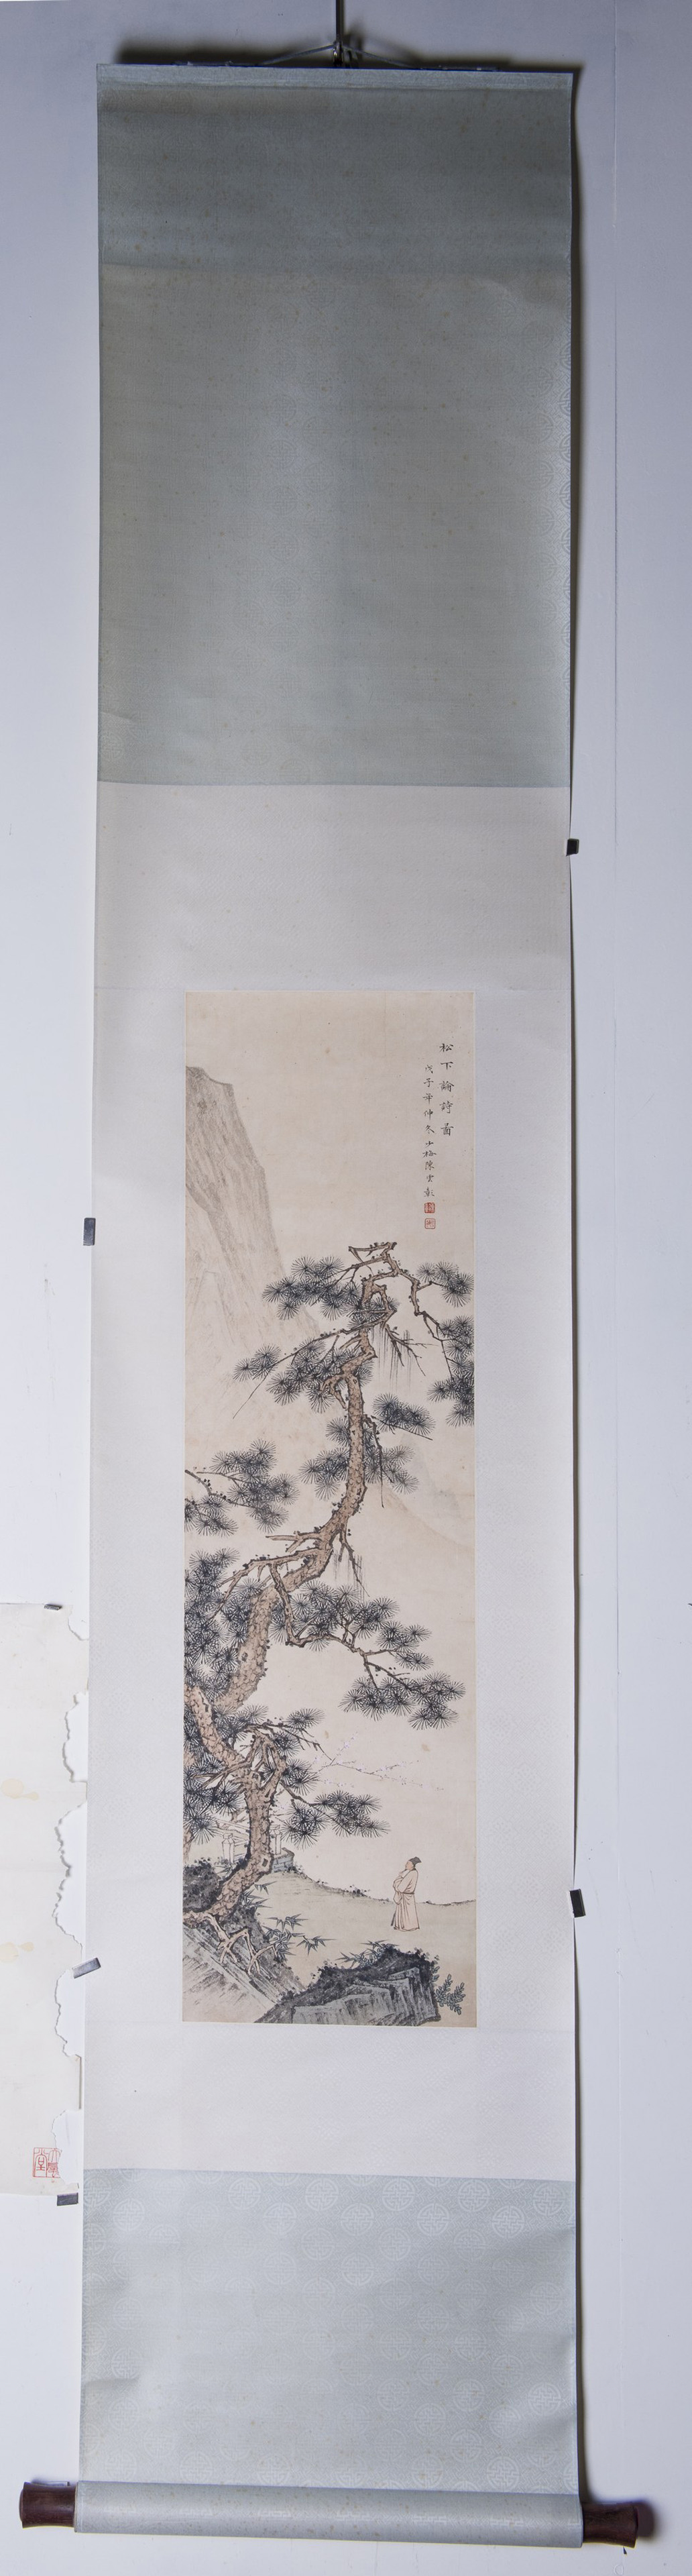 Chen Shao Mei (Attributed to, 1909-1954), Pine Tree